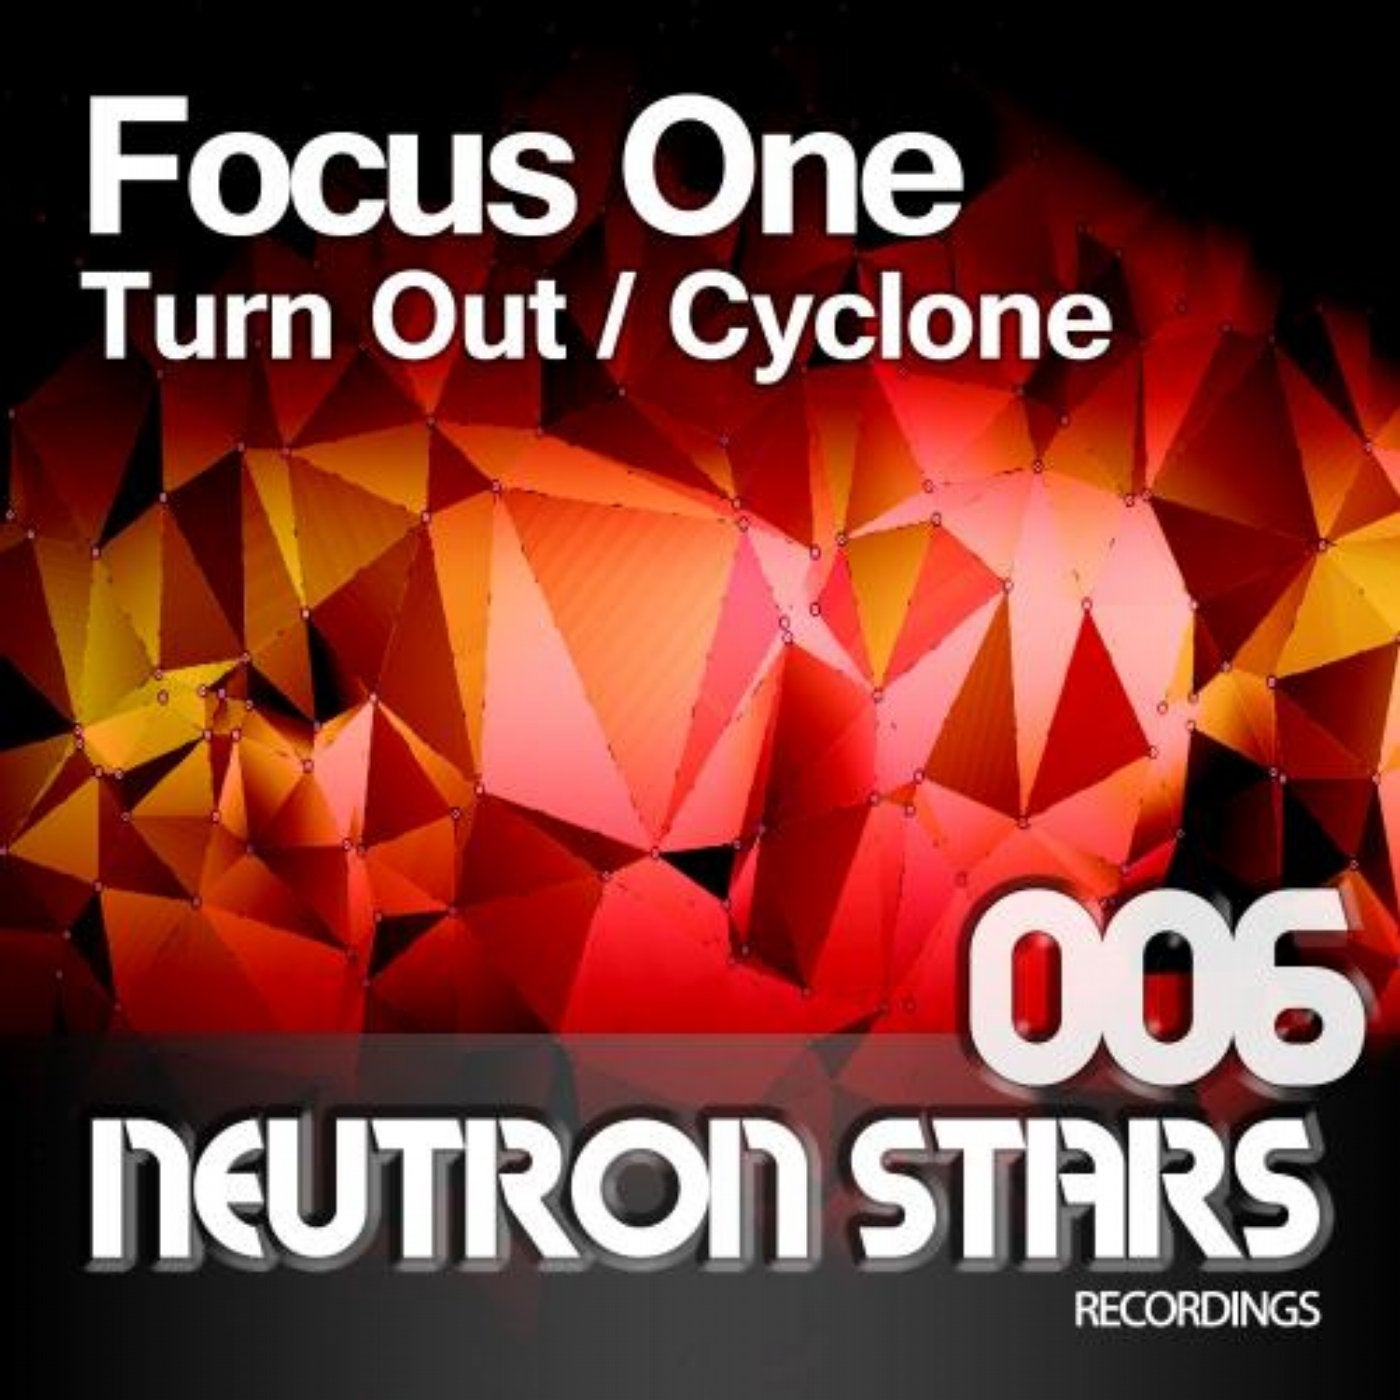 Turn Out / Cyclone